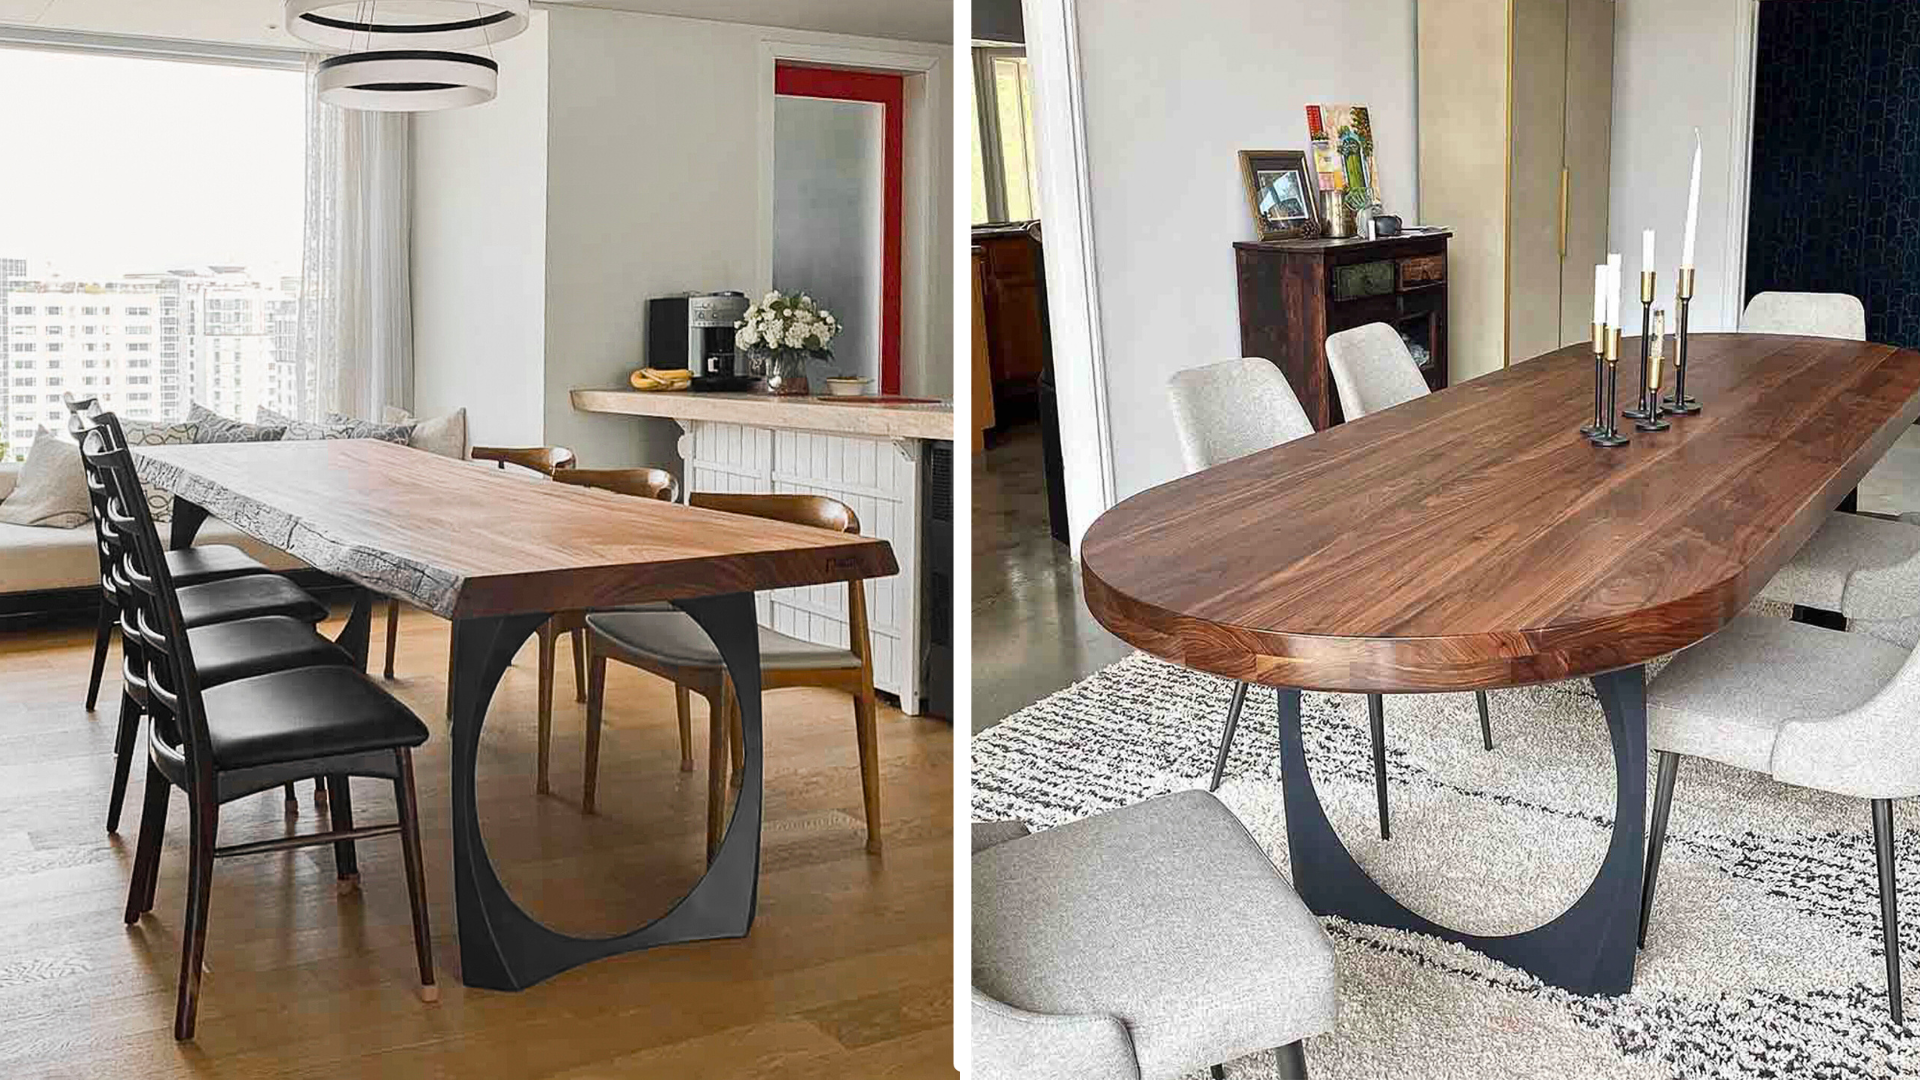 Oria metal table legs have a sleek and curved design that resembles a crescent moon.